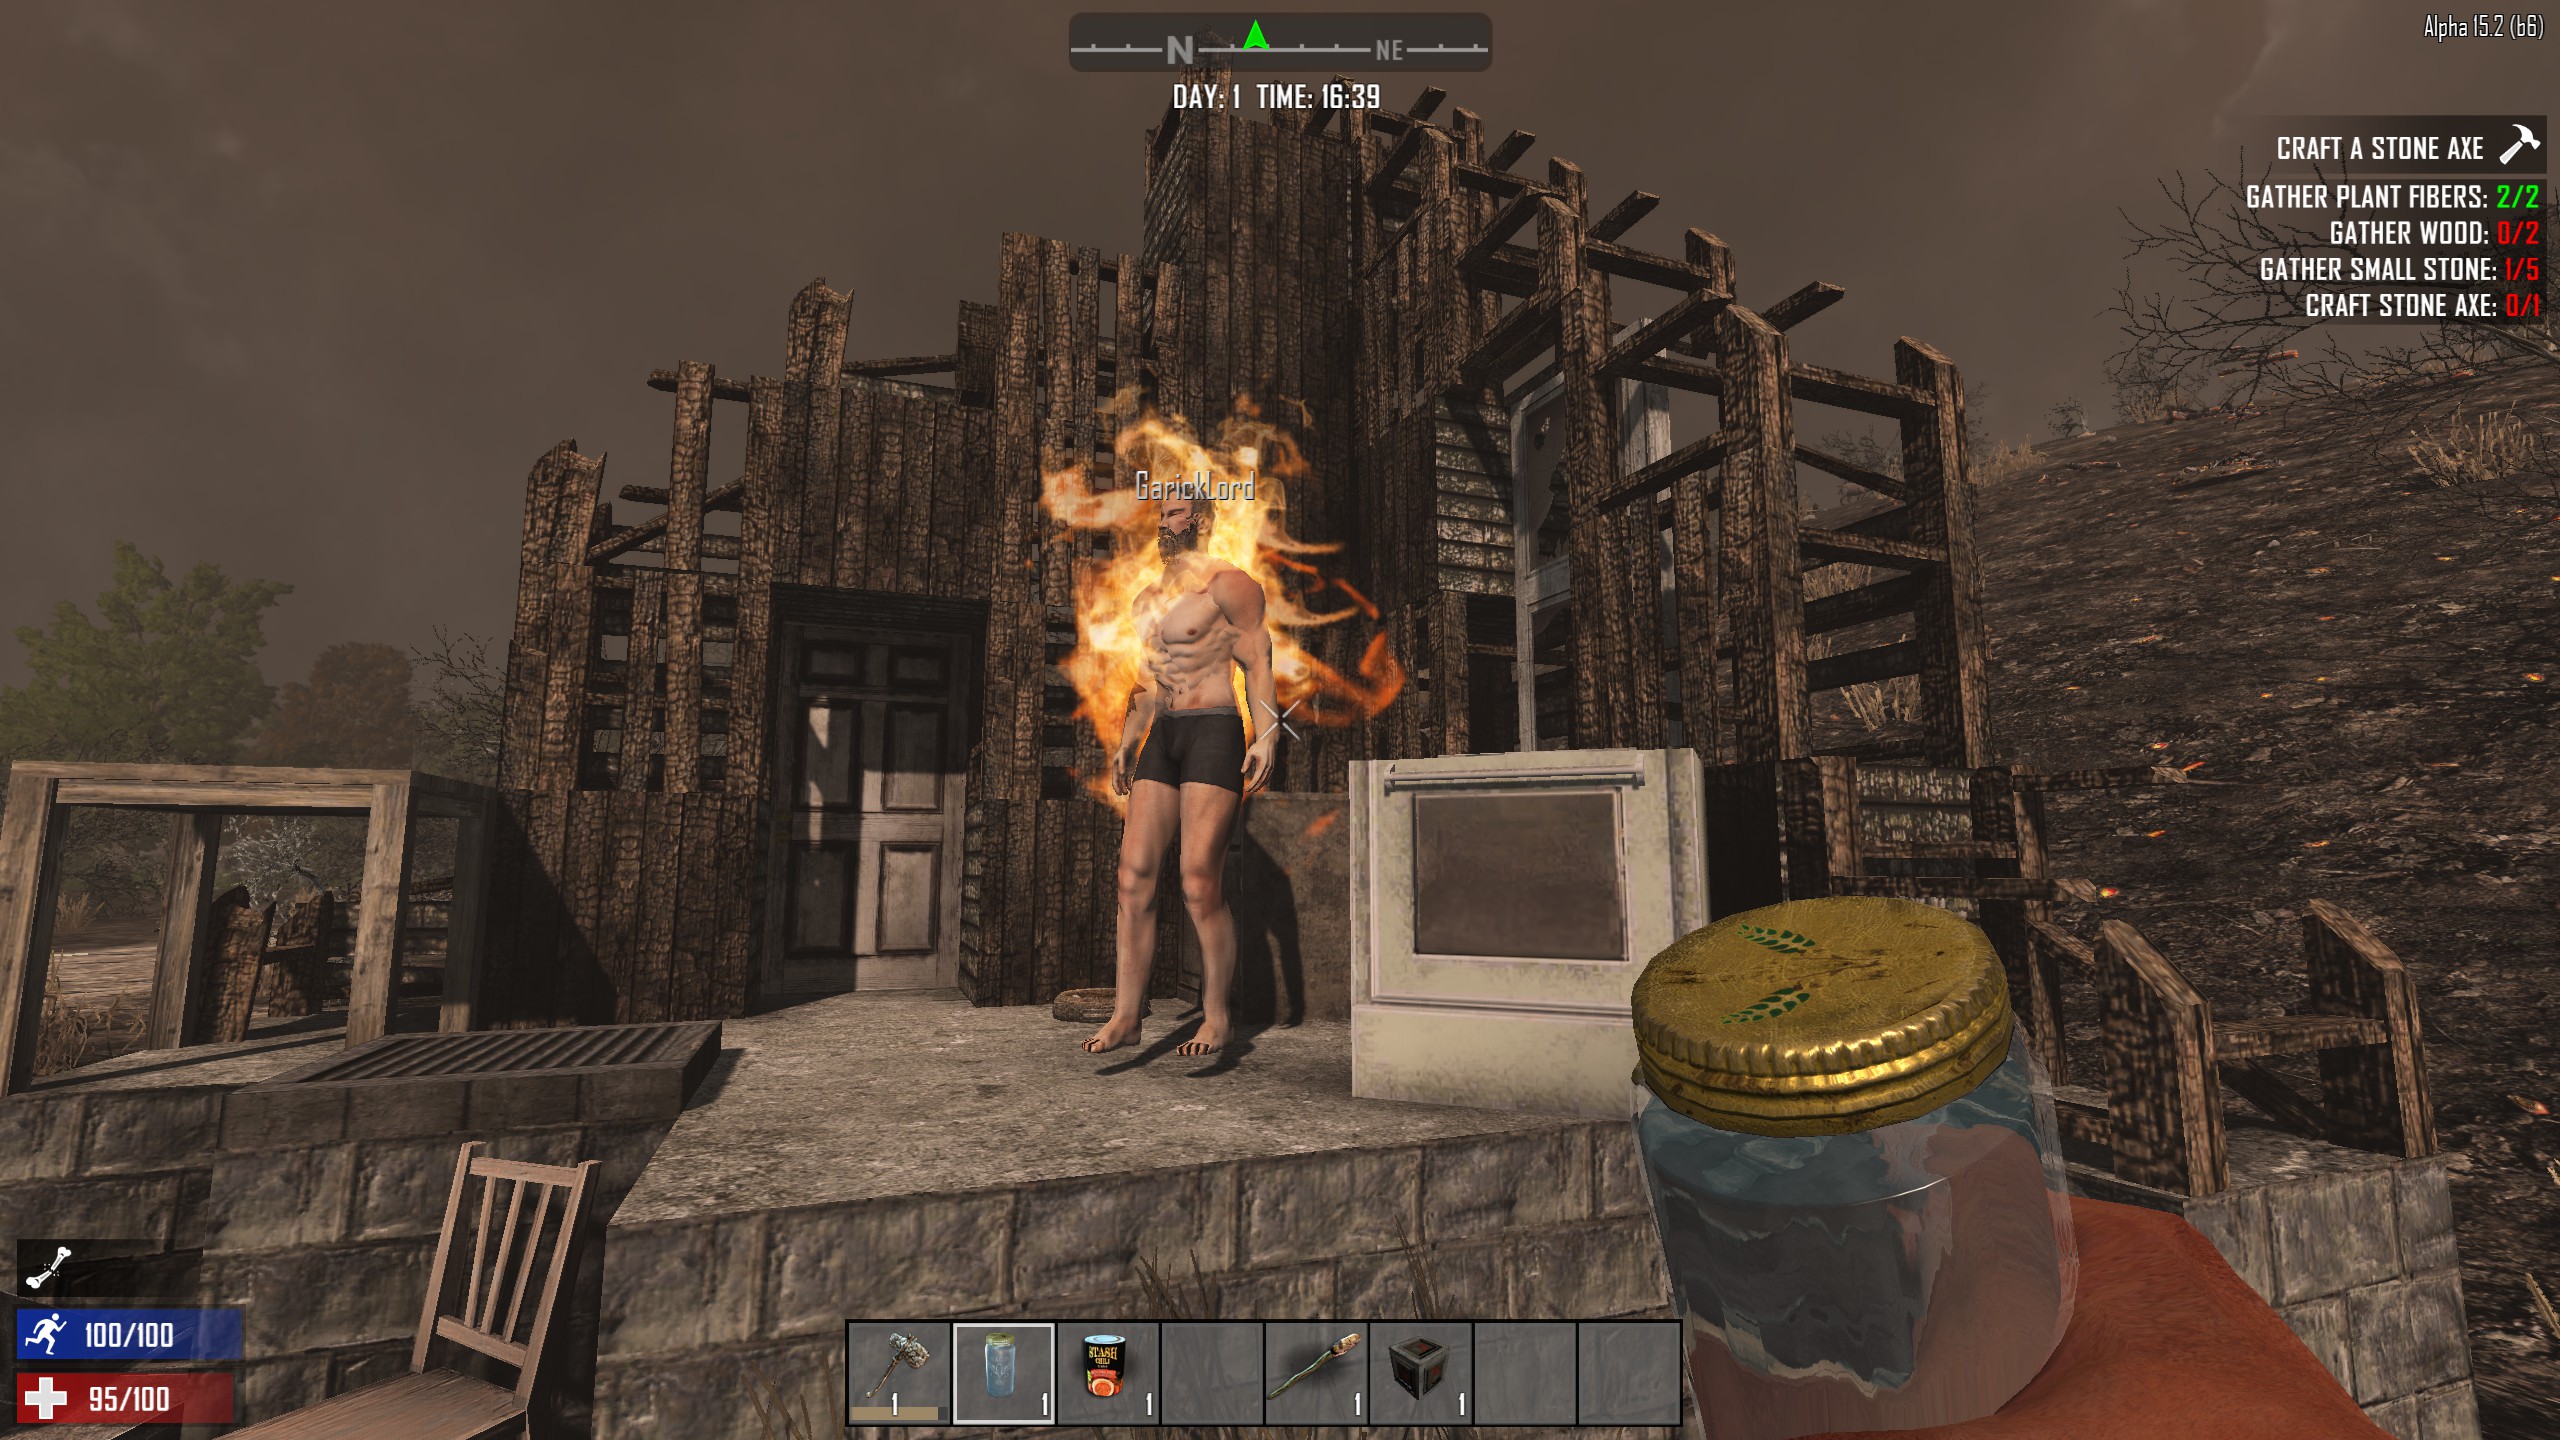 7 days to die cracked launchersettings.sdisableunet